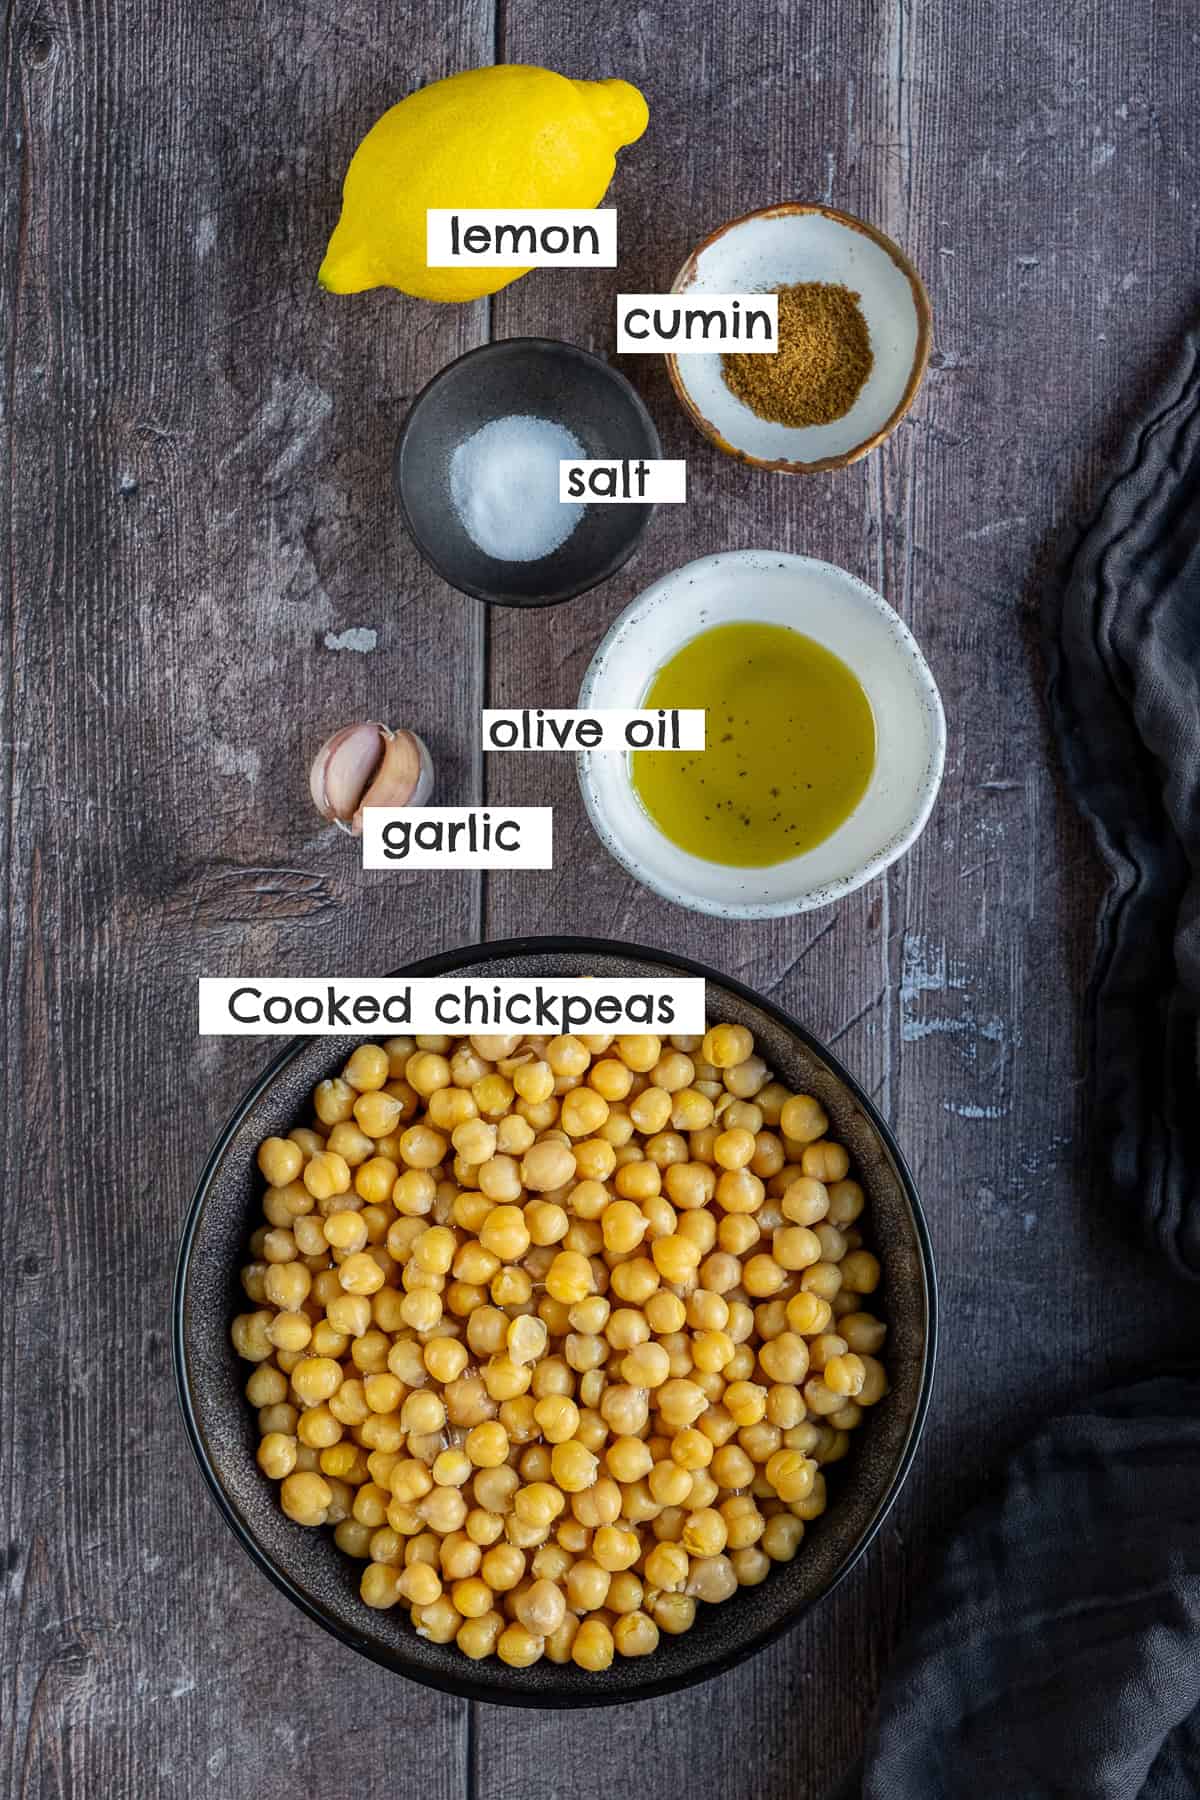 Cooked chickpeas, olive oil, garlic cloves, salt, cumin and lemon photographed from top view.